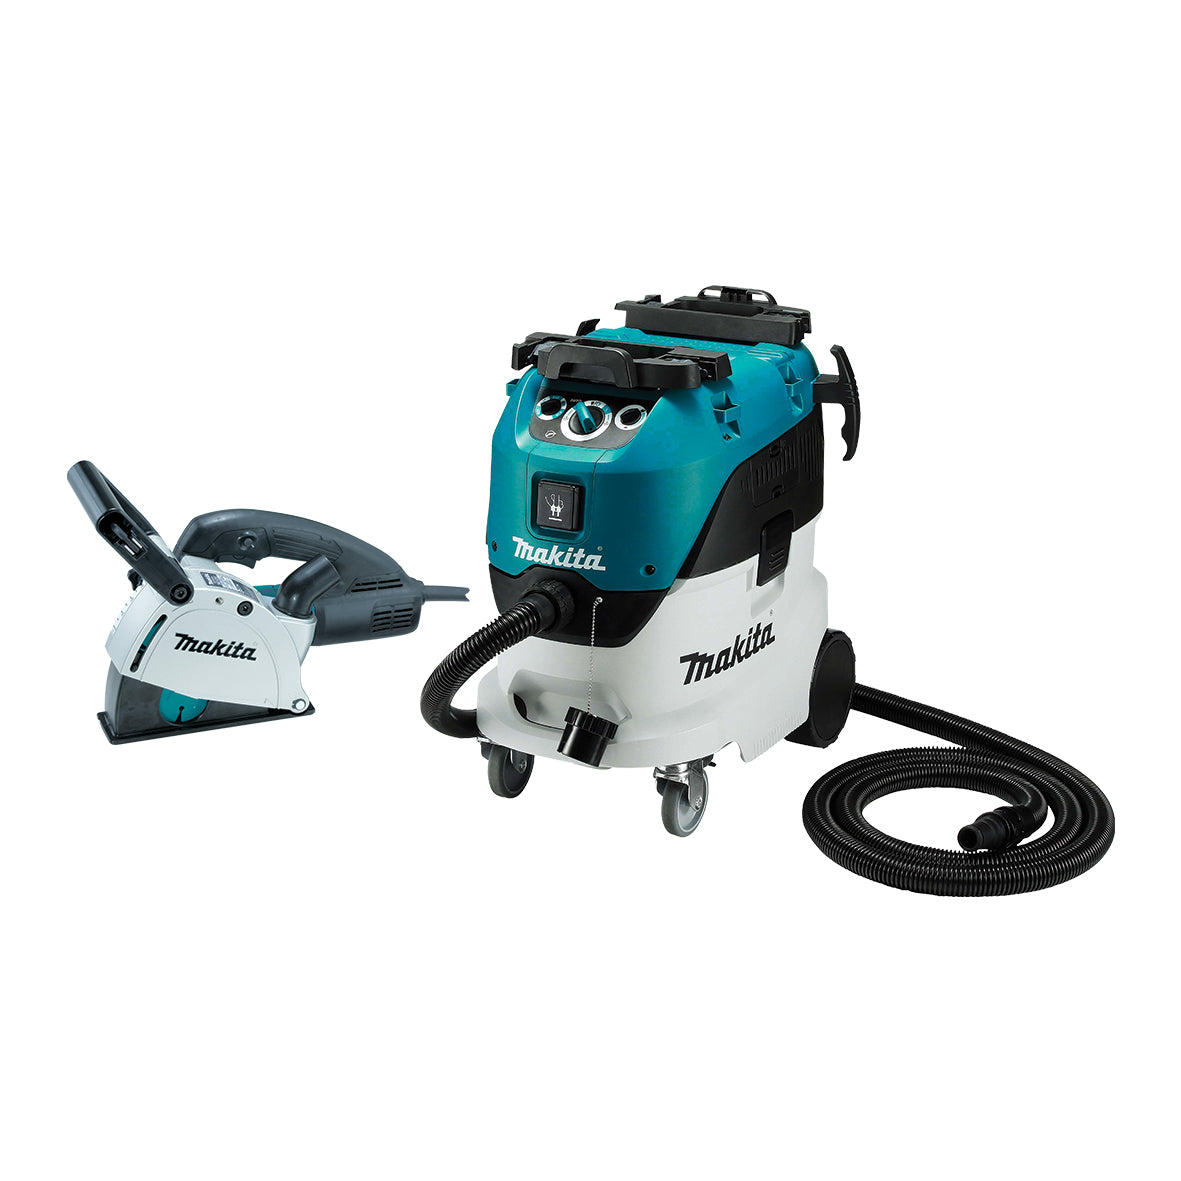 125mm 1400W Wall Chaser + 42L M-Class Vacuum Combo SG1251J-VC42M by Makita